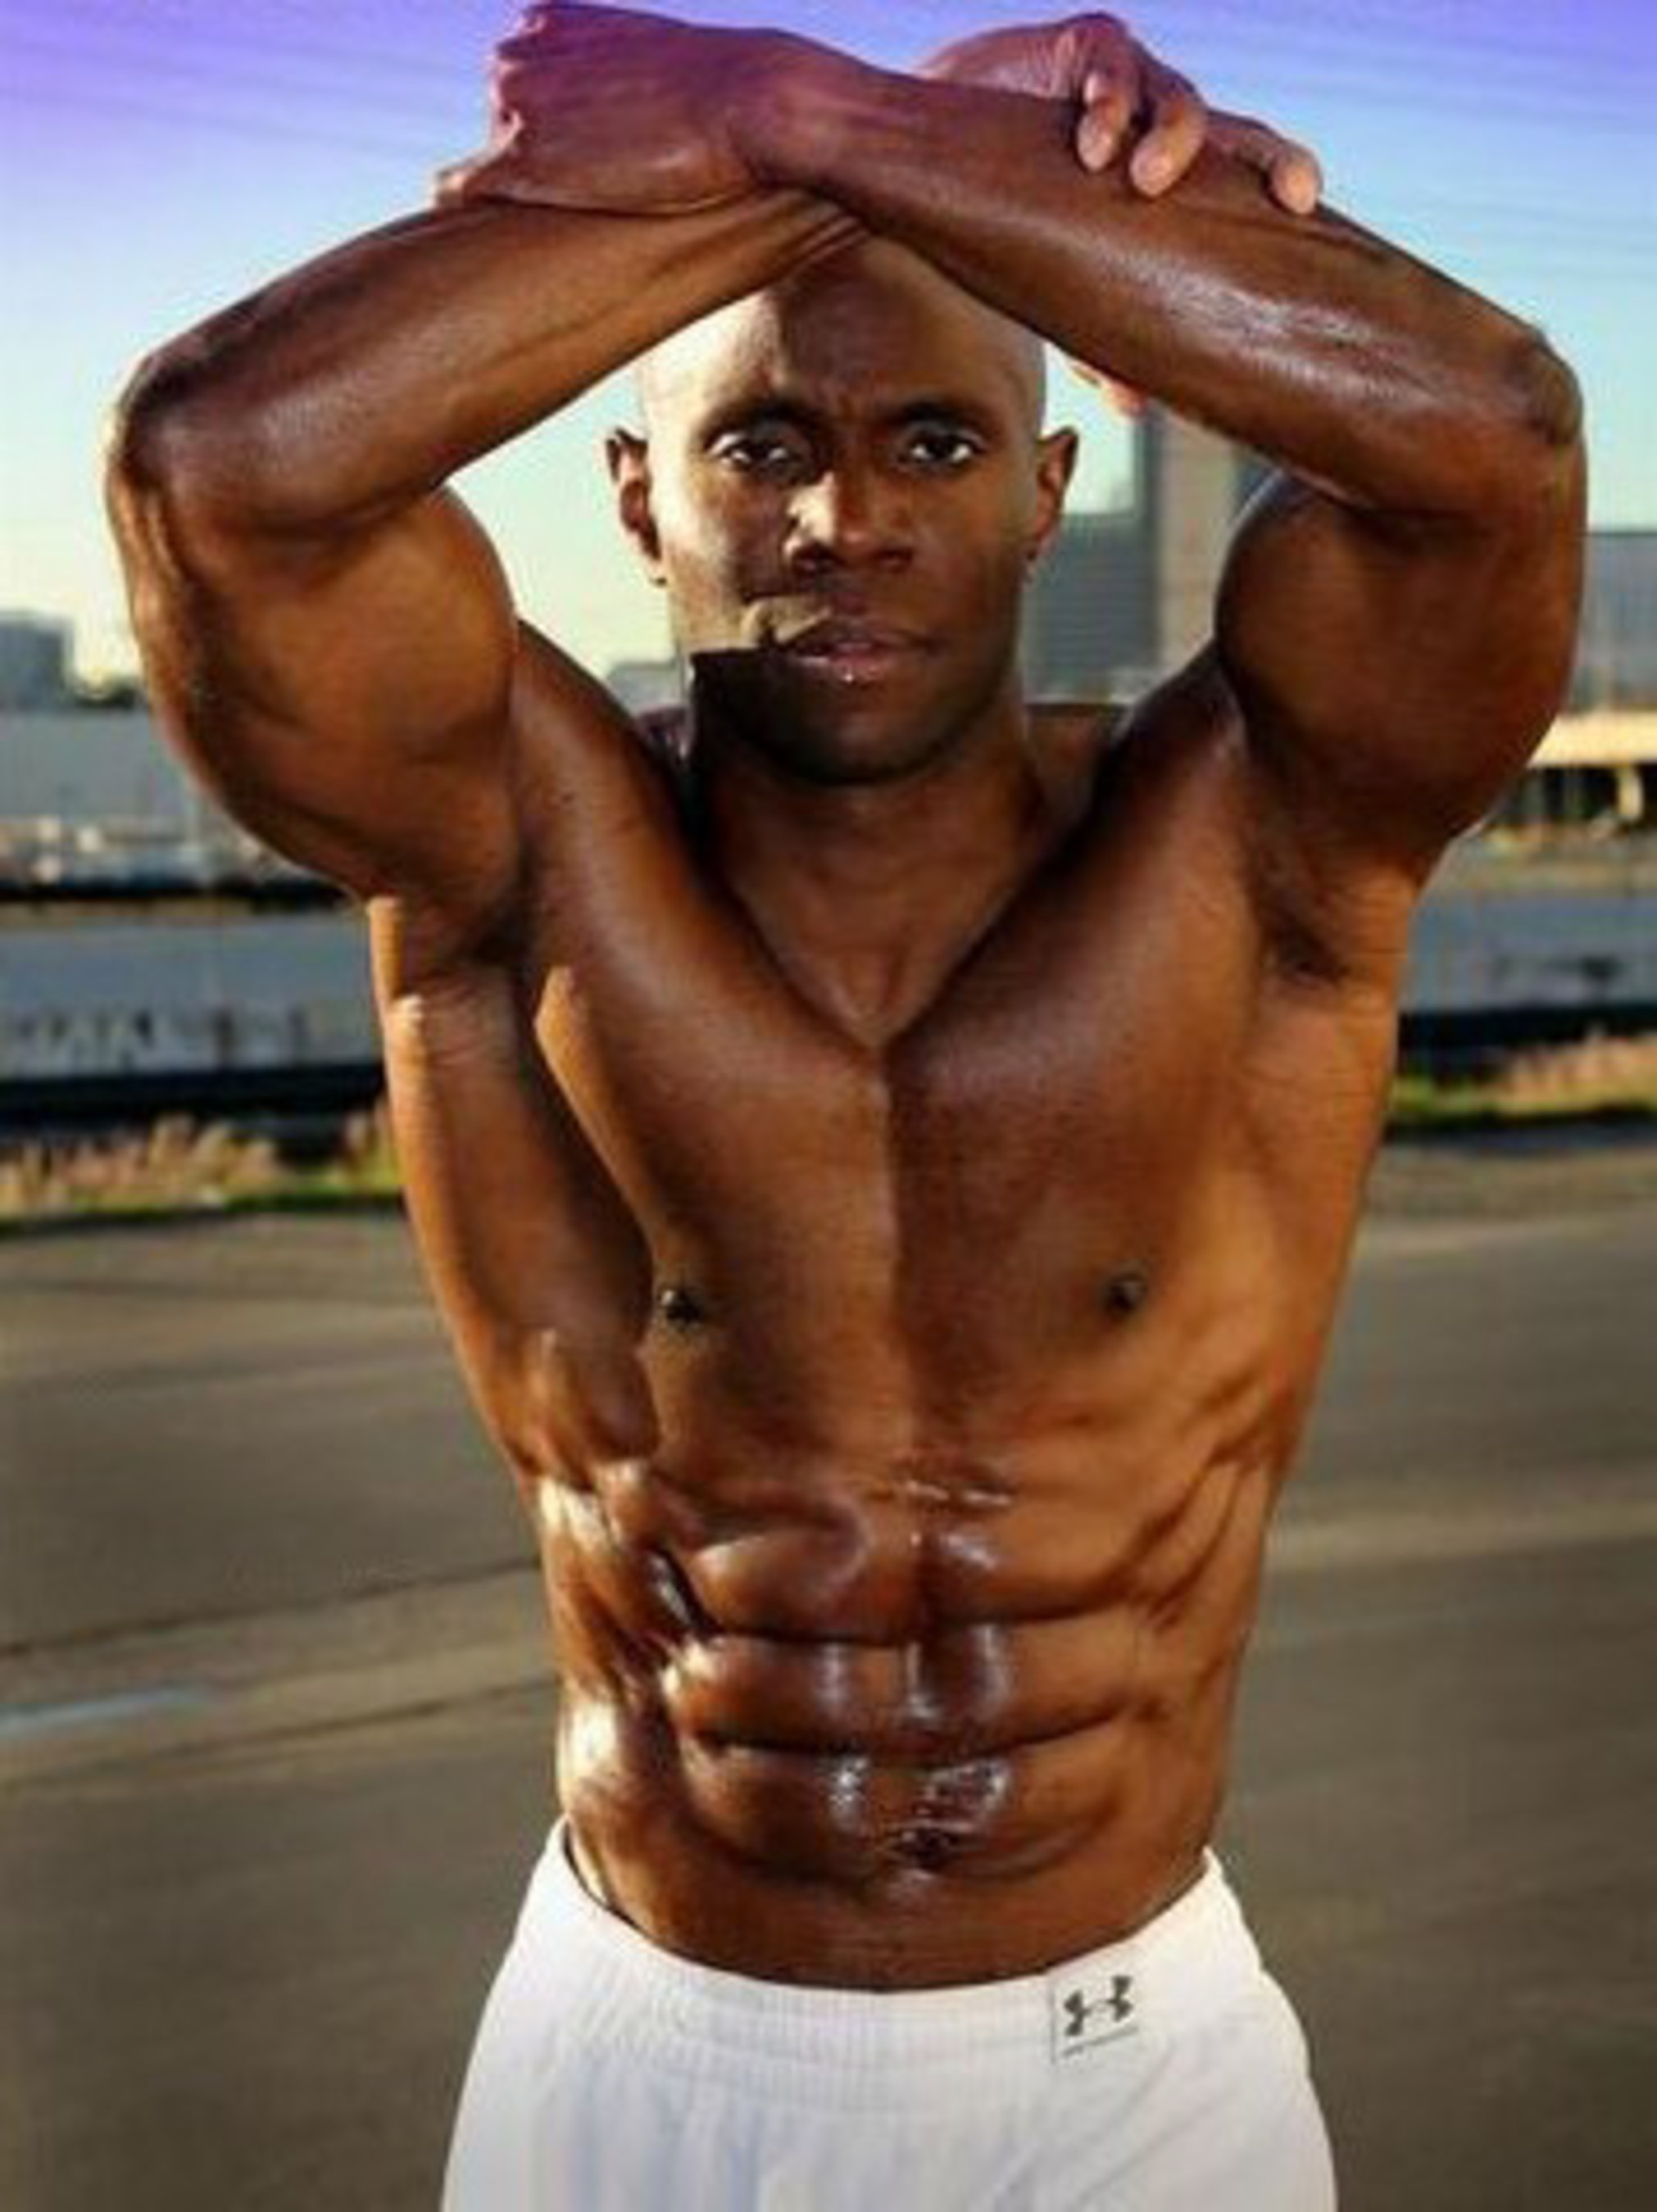 Over the past 6 years, OWNZONES spokesperson, Obi Obadike has established himself as one of the top fitness experts/fitness personalities in the world and has been featured on more than 50 fitness and health magazines covers.